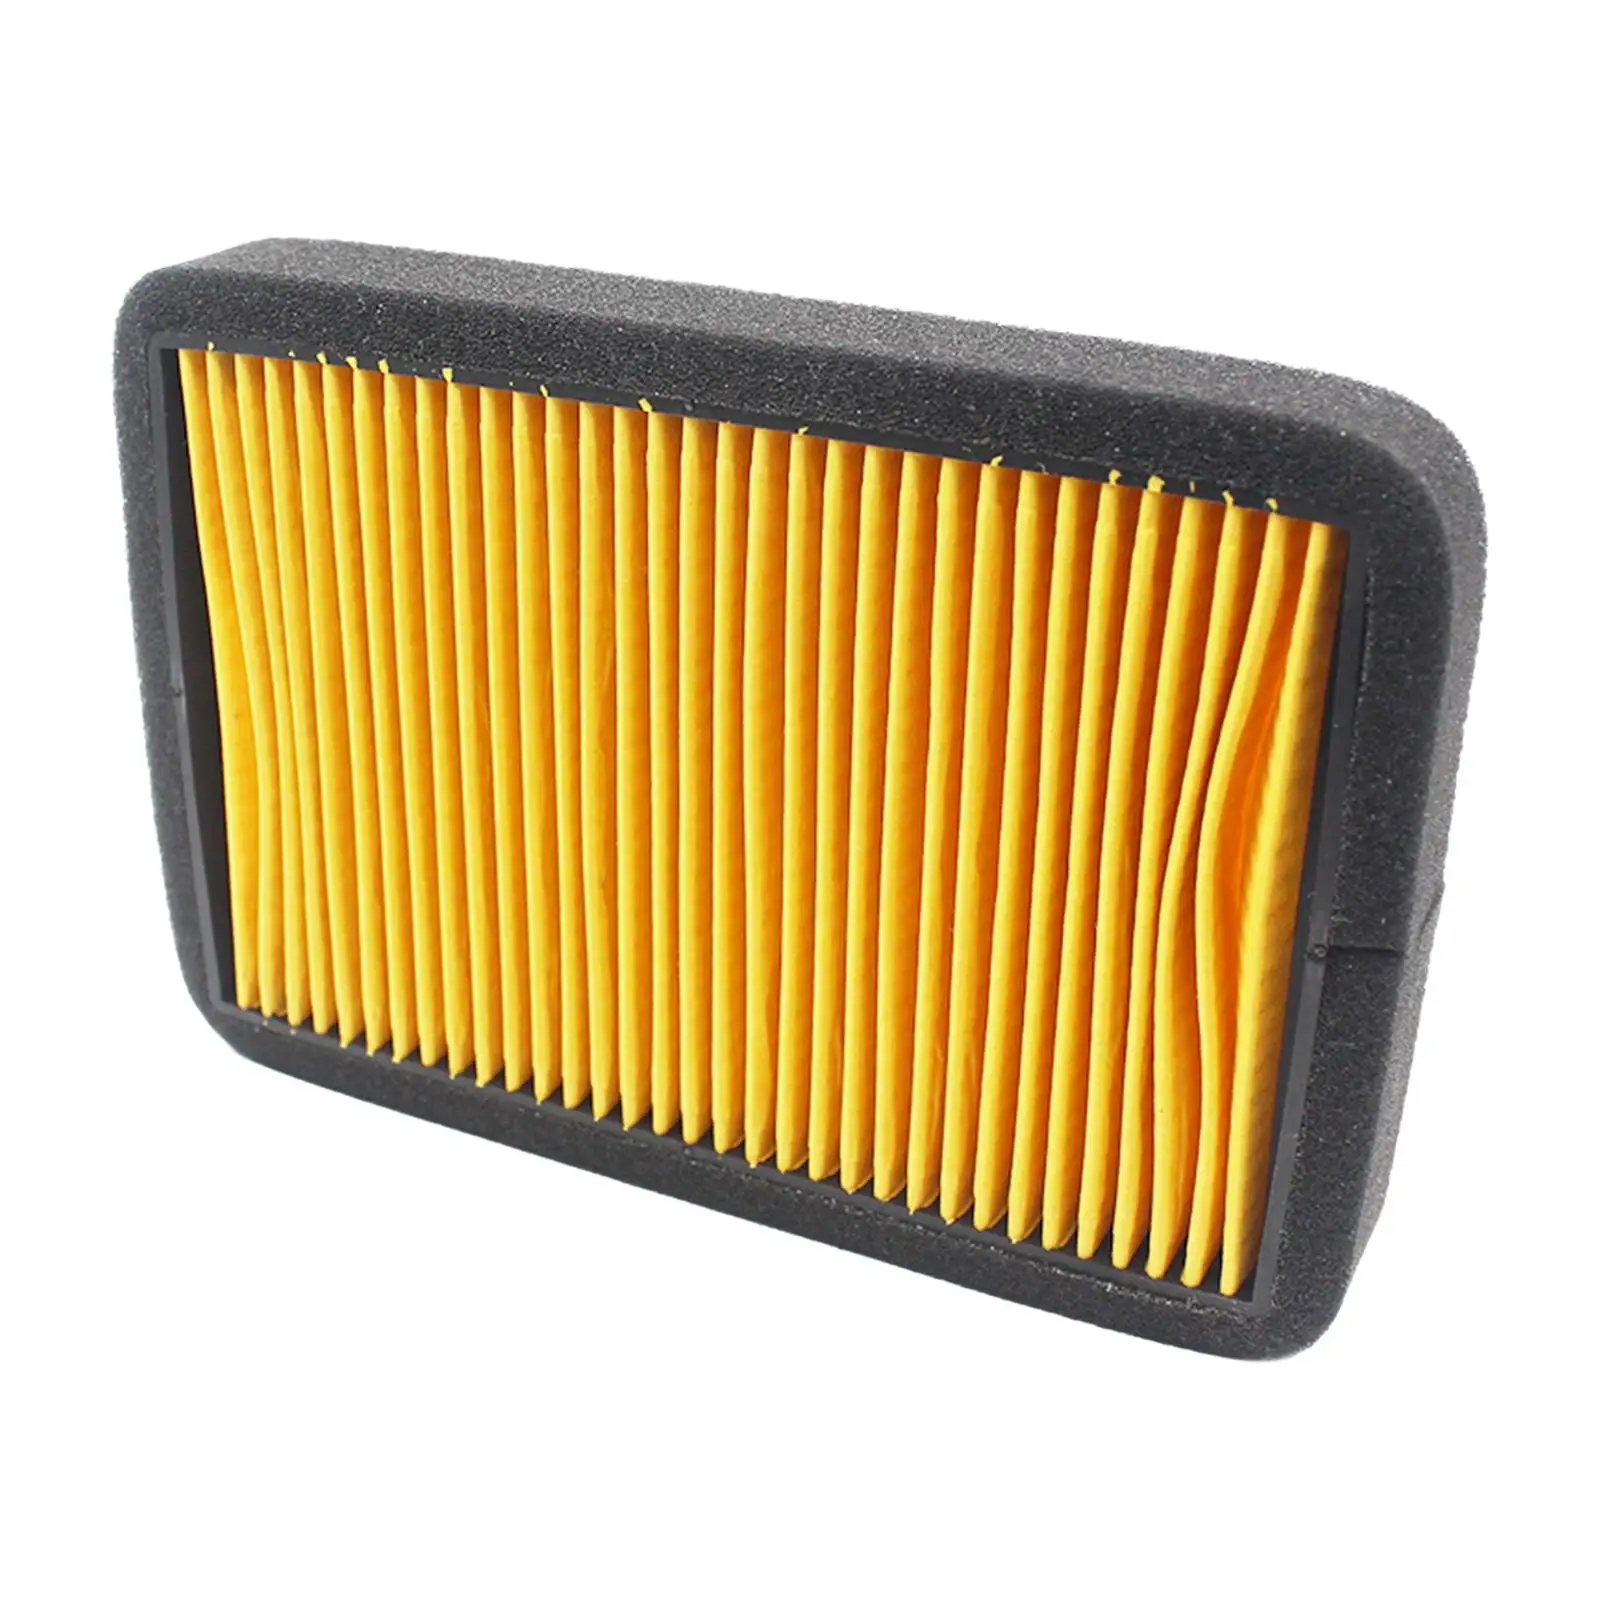 Air Filter Cleaner Bj150-29A-29B Fits for 150cc 500cc Tnt150 Durable